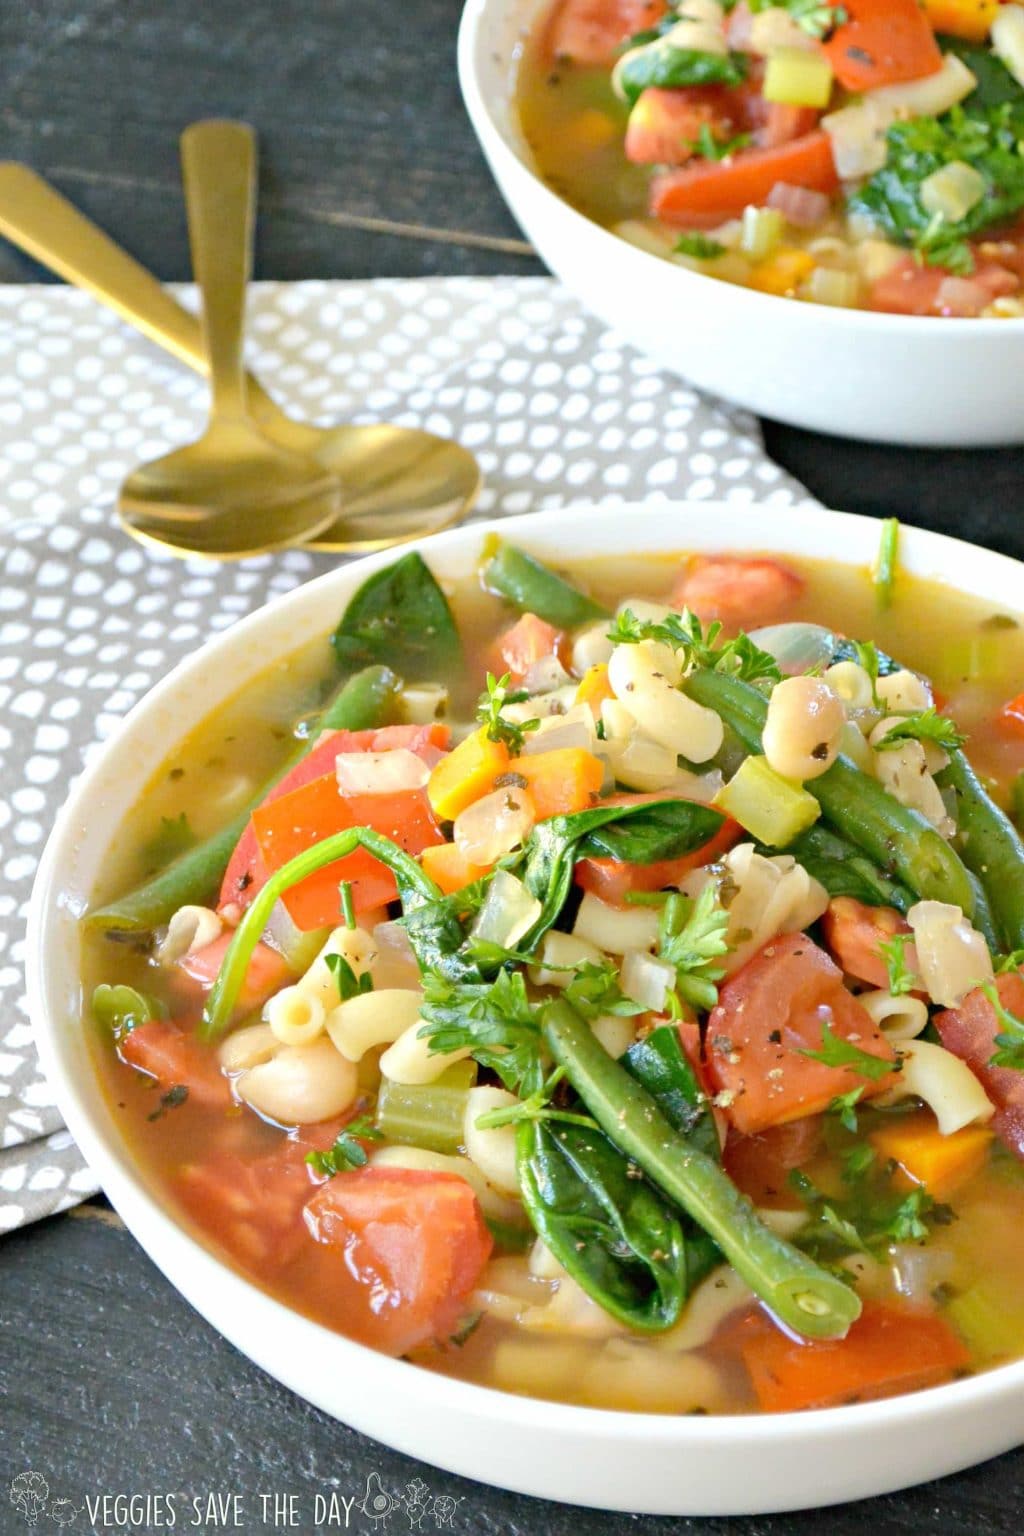 Vegan Minestrone Soup with Fresh Vegetables from Veggies Save The Day